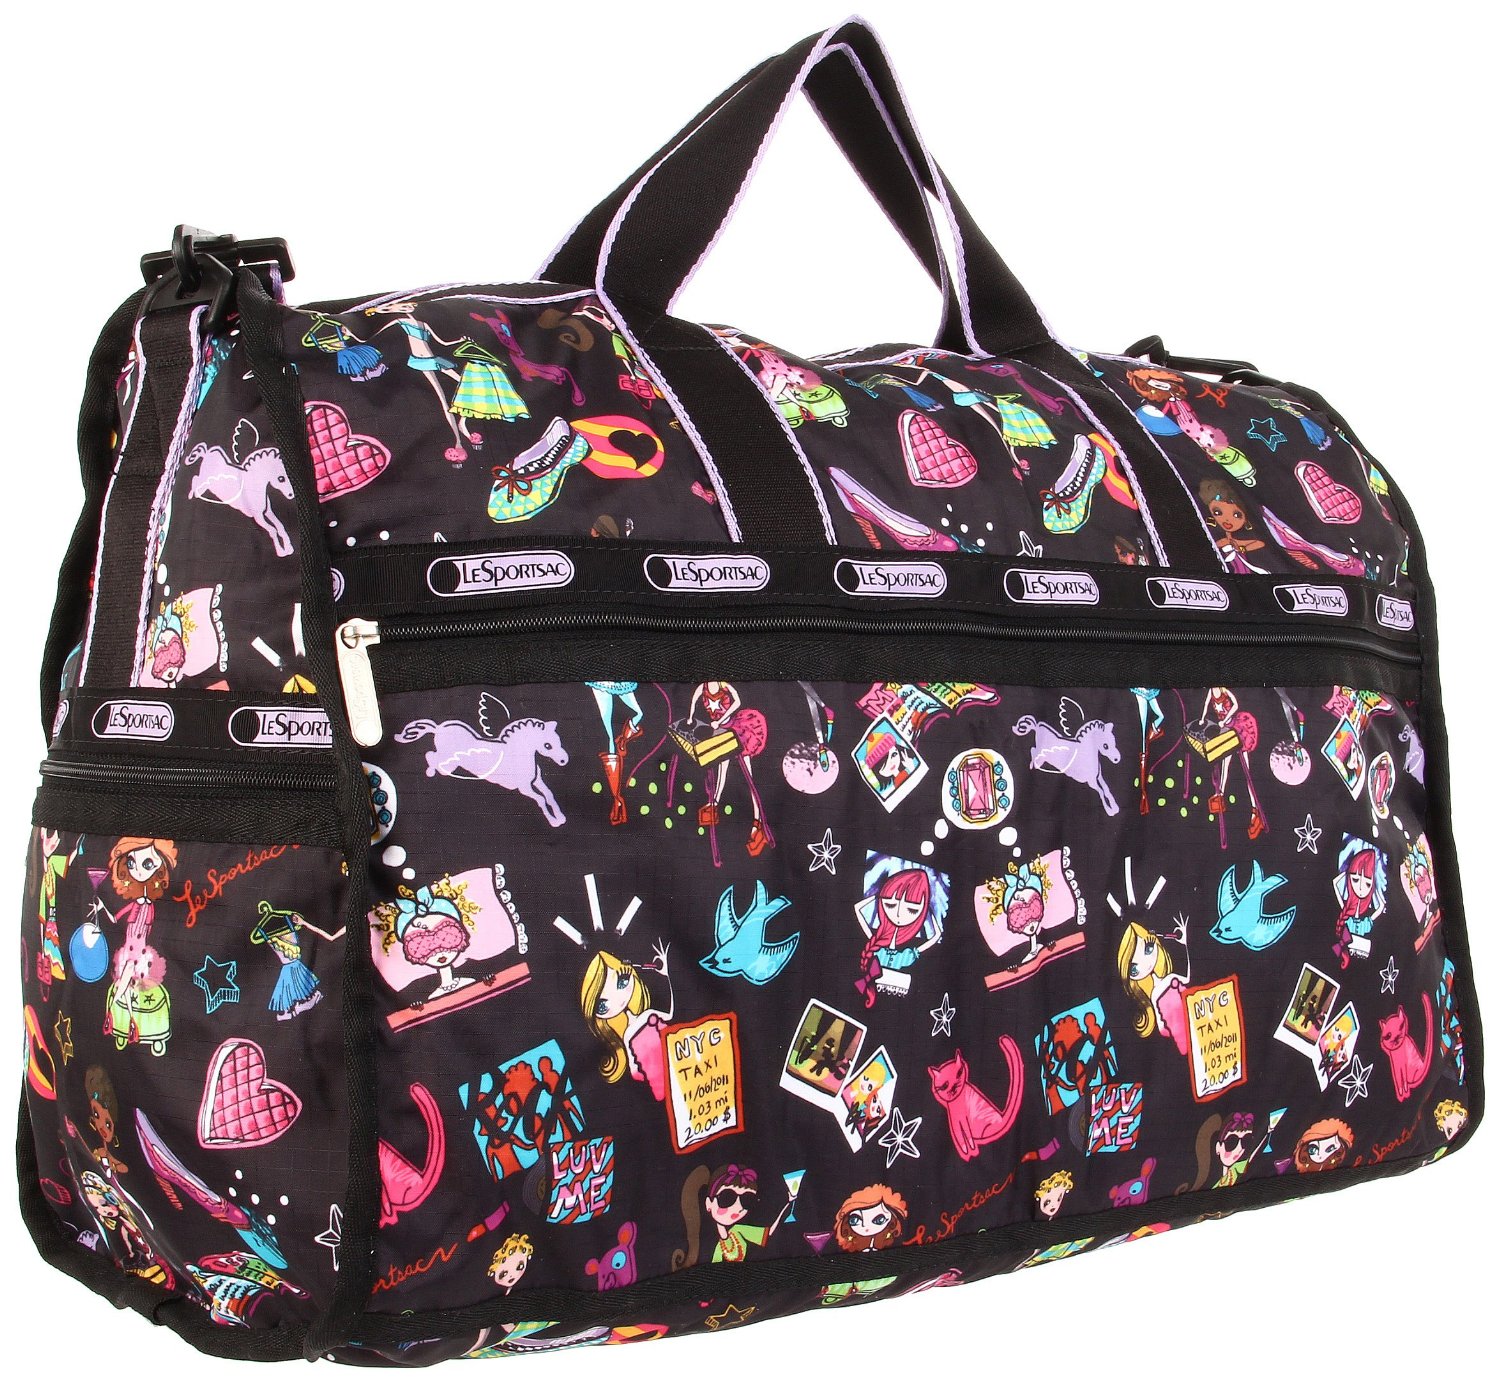 Lesportsac Travel Bags For Women | IUCN Water